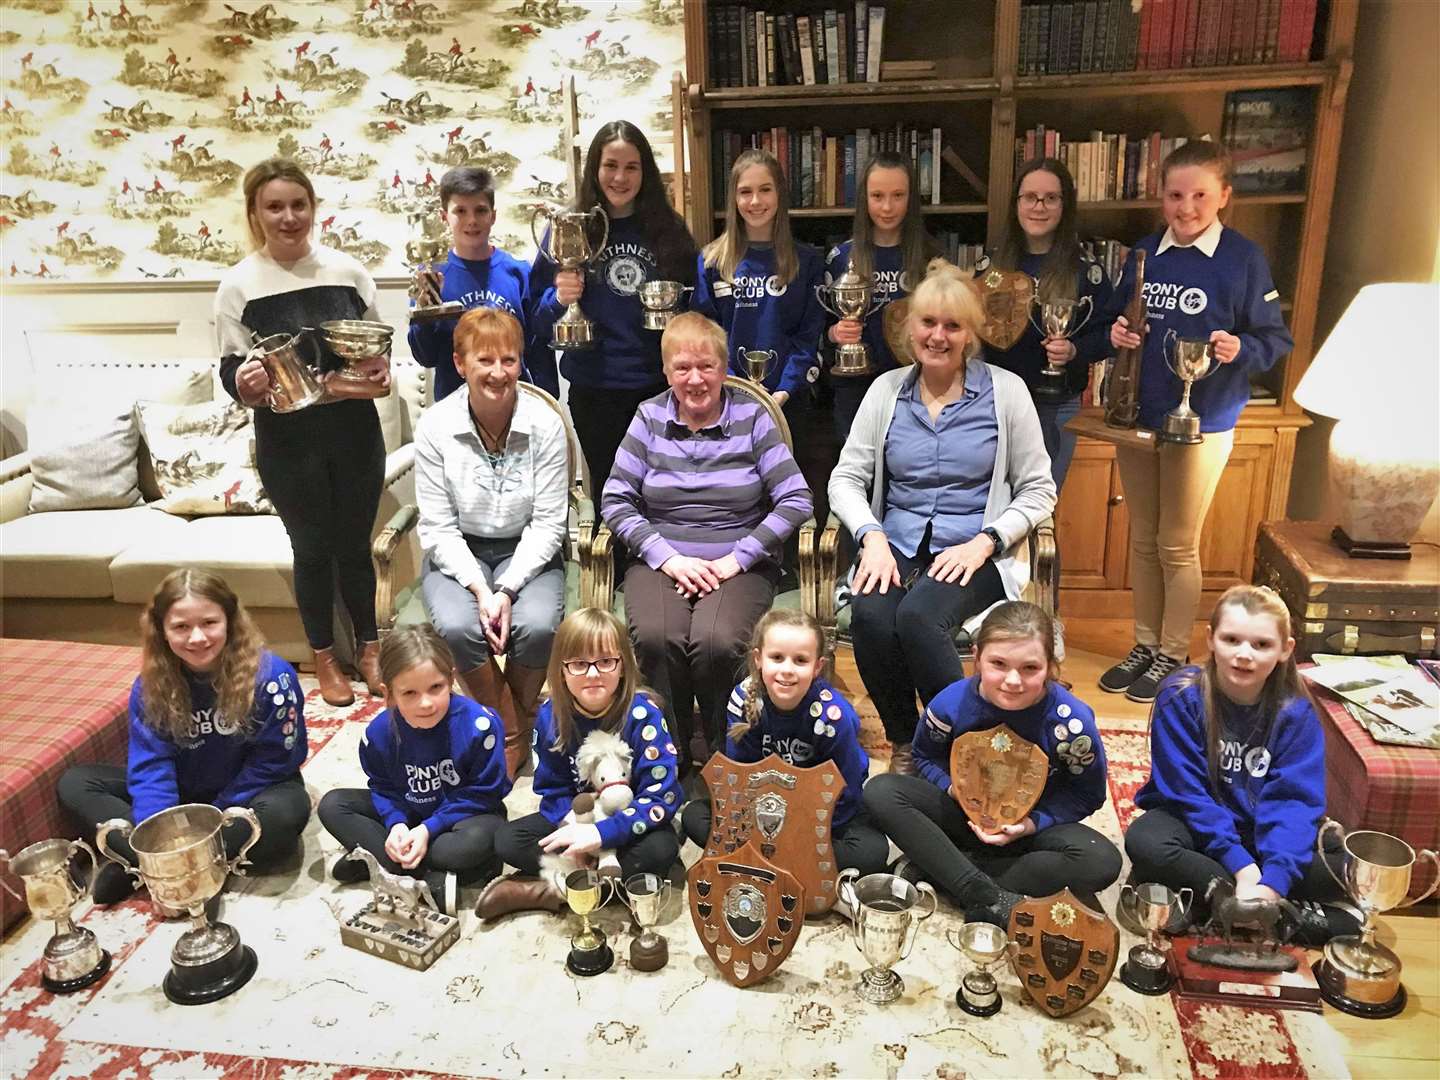 Members of Caithness branch of the Pony Club following the annual presentation of prizes. Back row (from left): Emma Coghill, Liam Mackenzie, Morven Mackenzie, Erin Hewitson, Alysha Homes and Ellen Traquair. Middle row: Jane Campbell, honorary president Jessie Allan and retiring DC Linda Ramsøy. Front: Leoni Kennedy, Erica Pottinger, Ella Budge, Aimee Homes, Gina Cowe and Isla Miller.